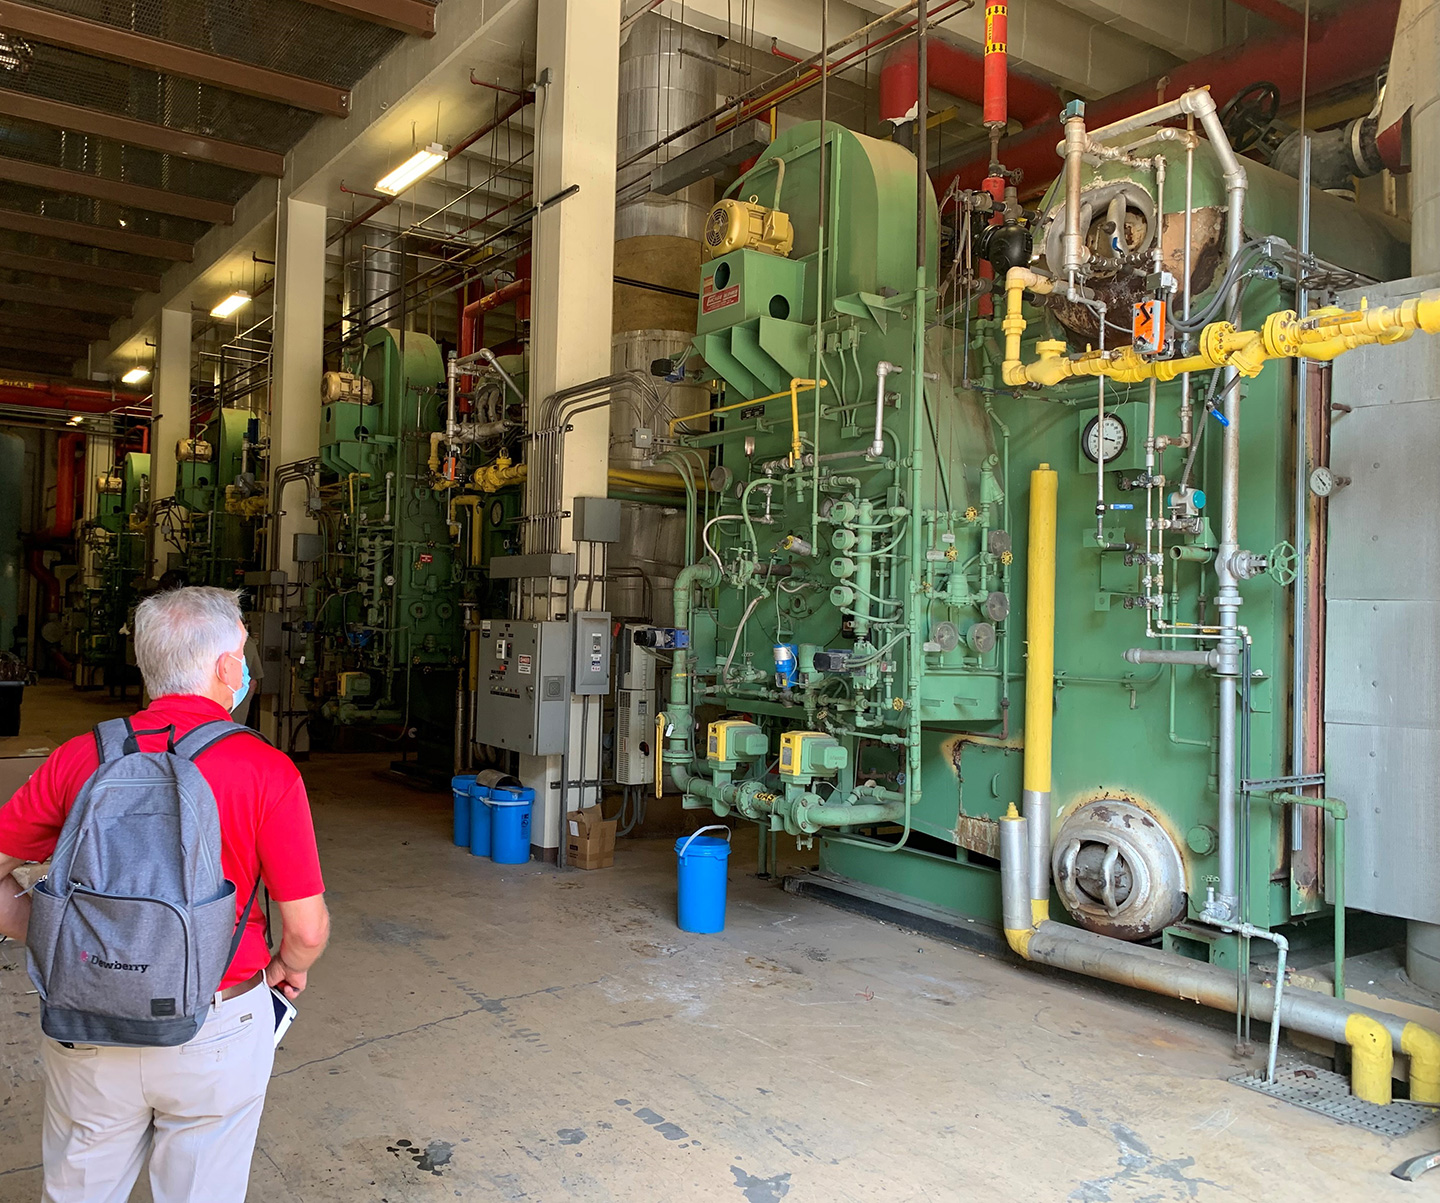 There are many challenges to decarbonizing/electrifying gas fired steam boilers. It is important to assess what you have and make a plan for the whole system before replacing equipment.